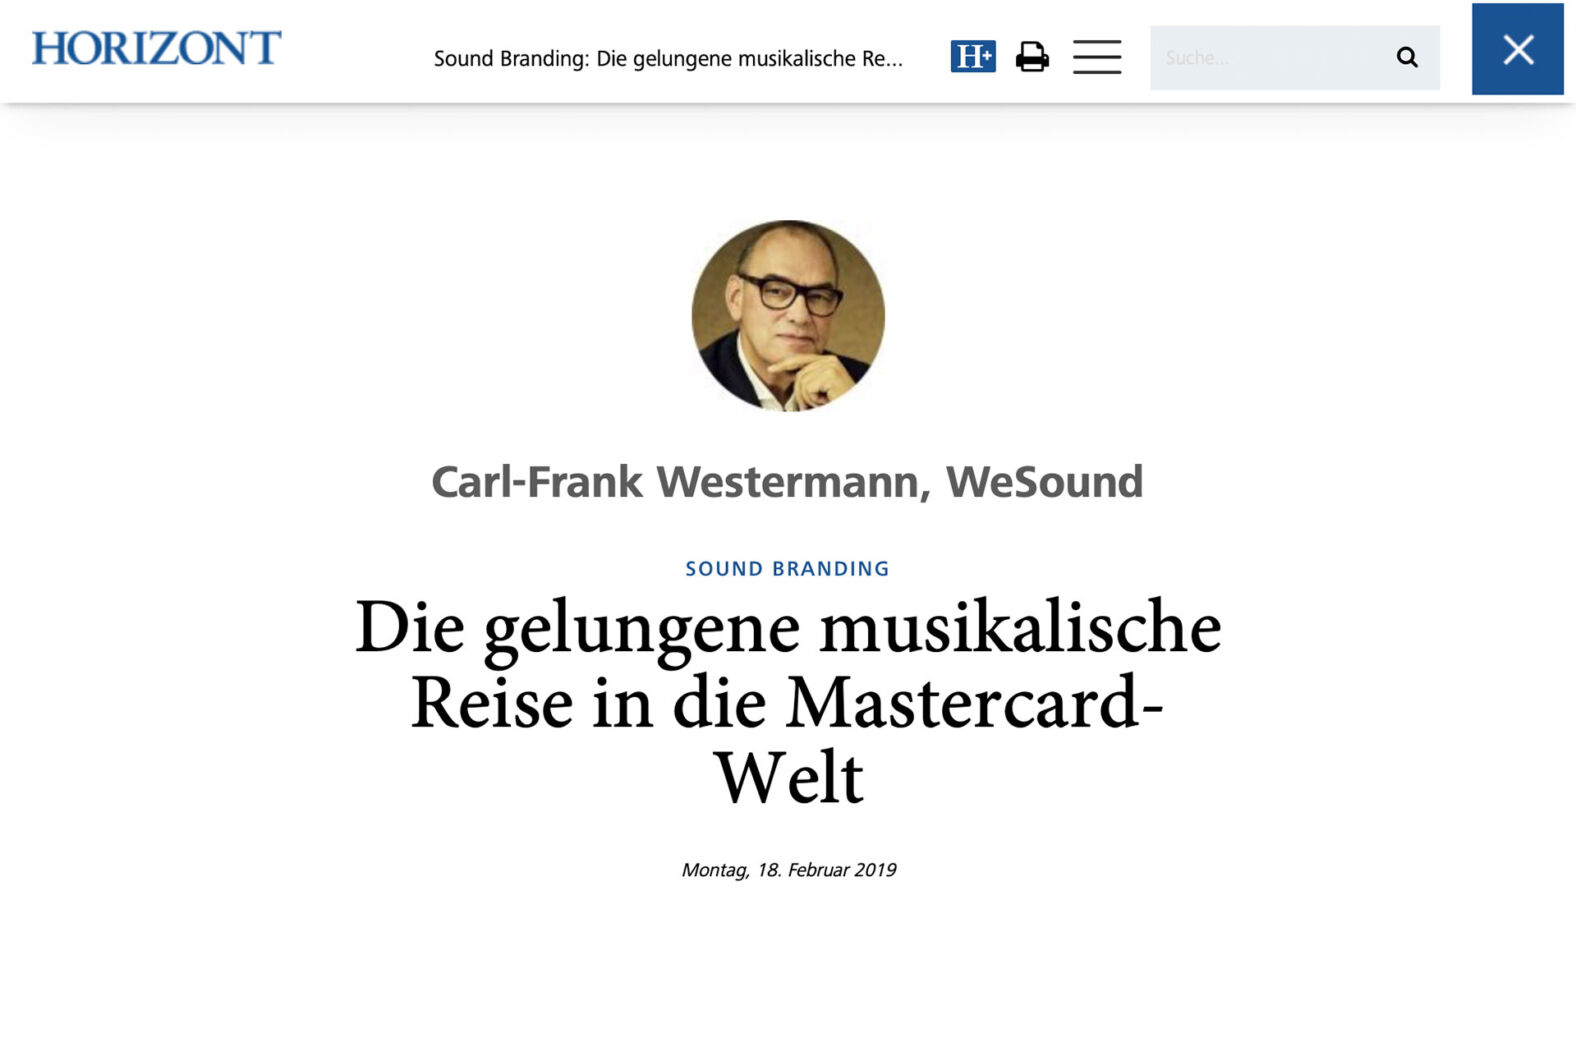 HORIZONT Article by Carl-Frank Westermann